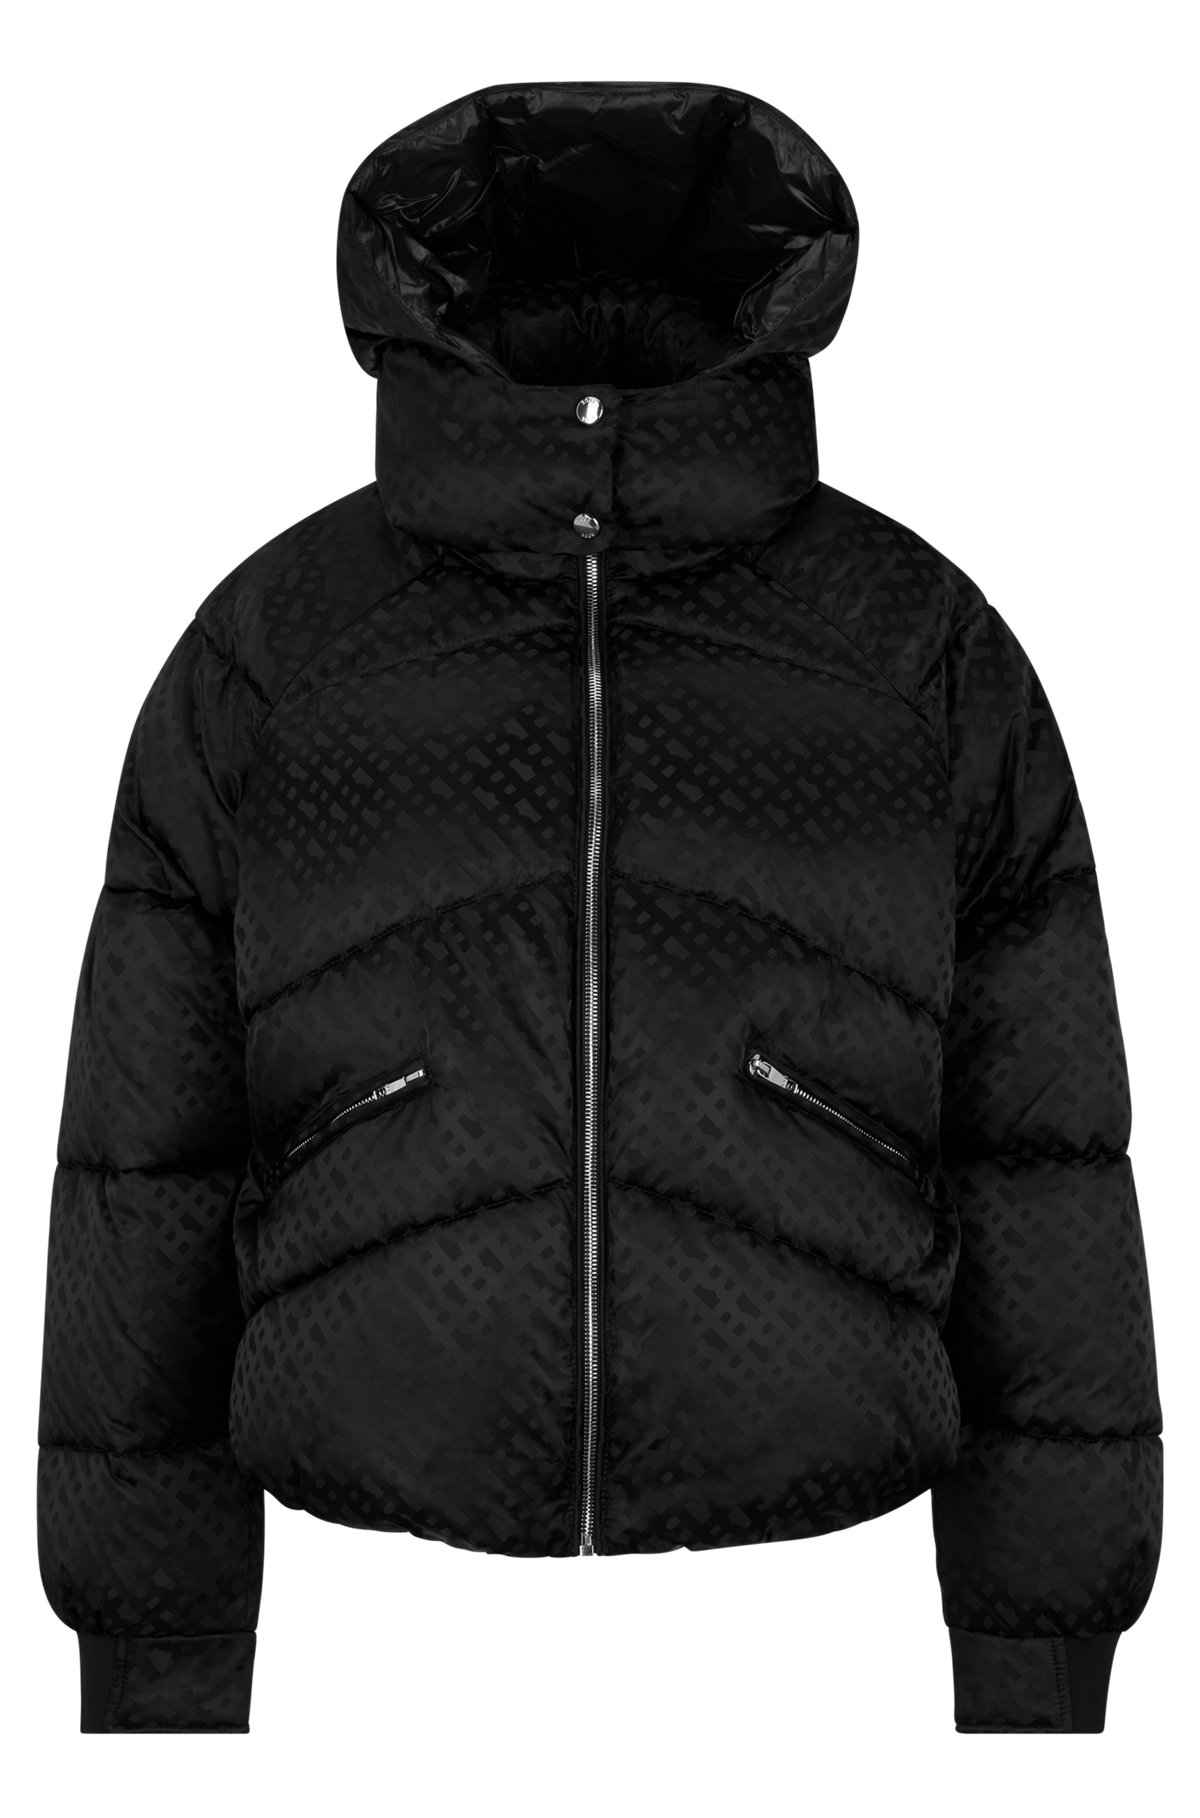 Boss monogram-jacquard Puffer Jacket with Water-Repellent Finish- Black | Women's Casual Jackets Size 2